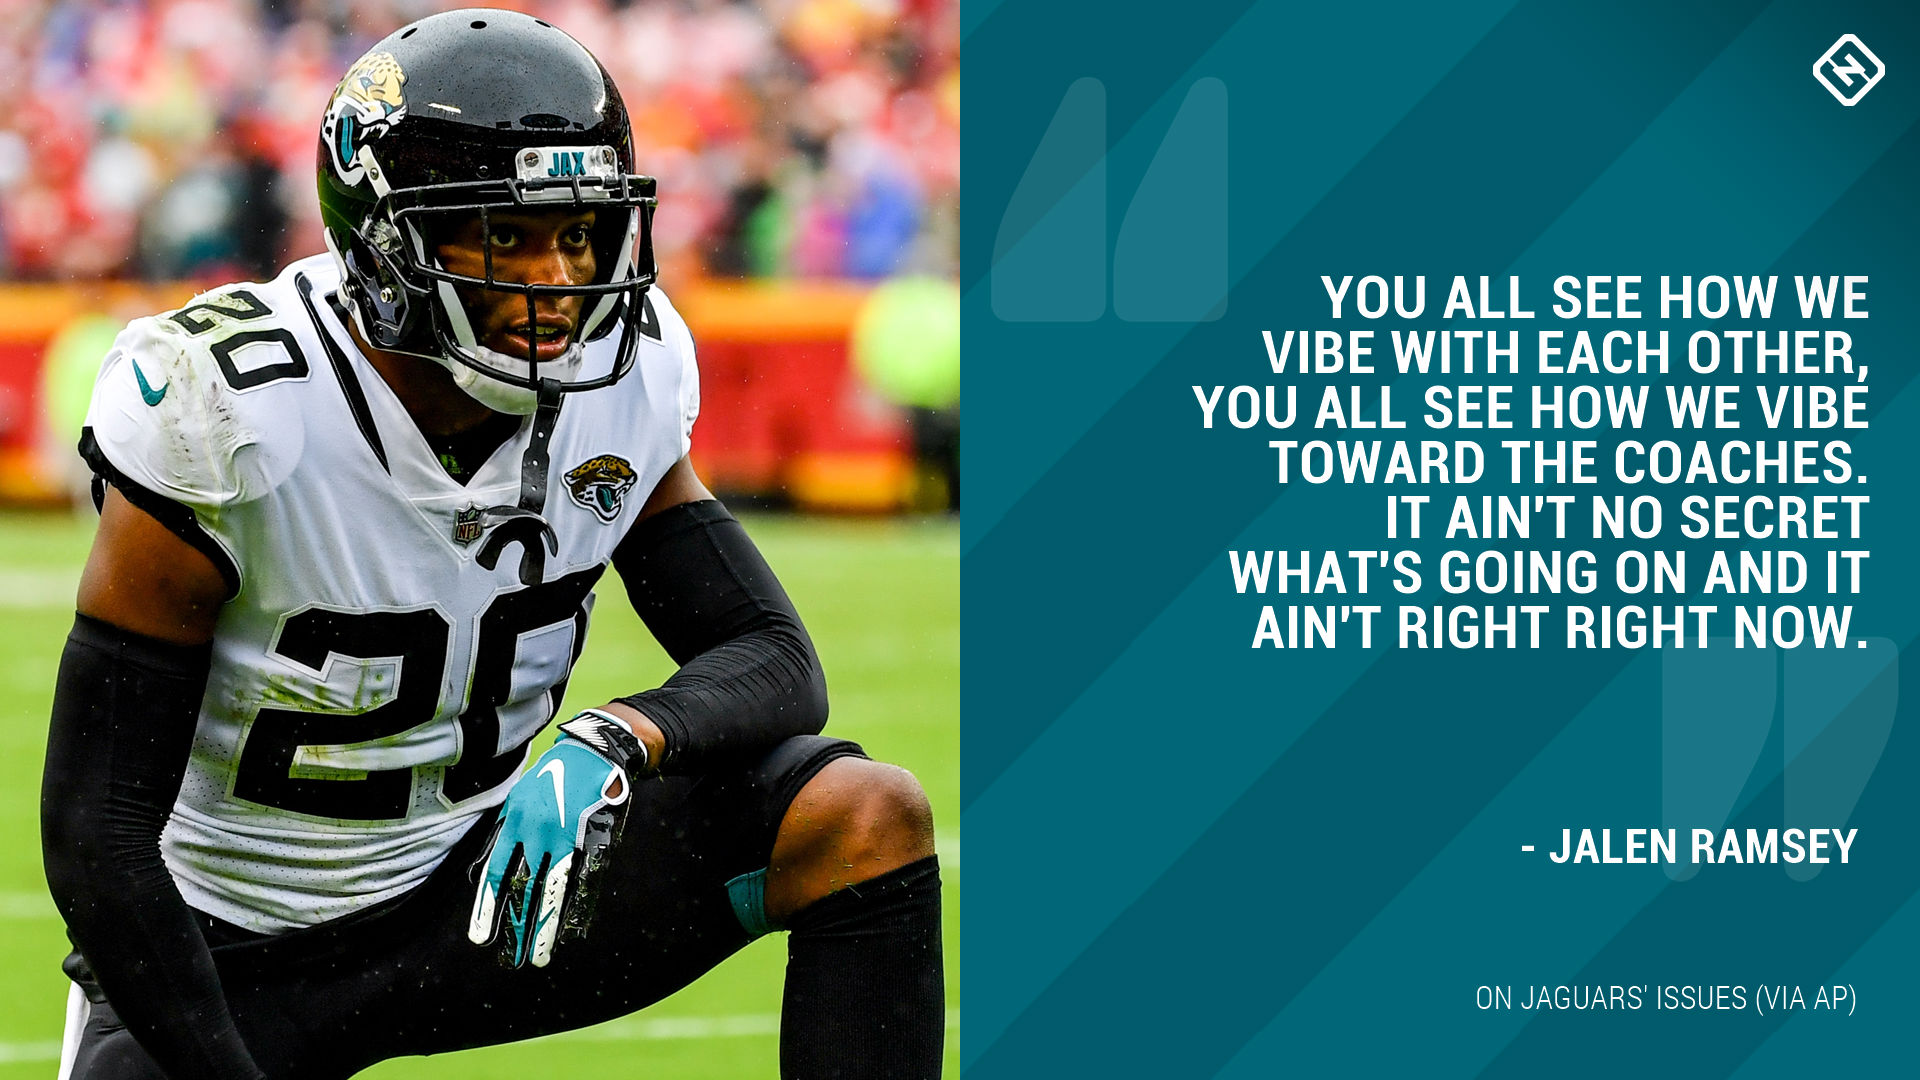 Jalen Ramsey Quote About Jacksonville - HD Wallpaper 